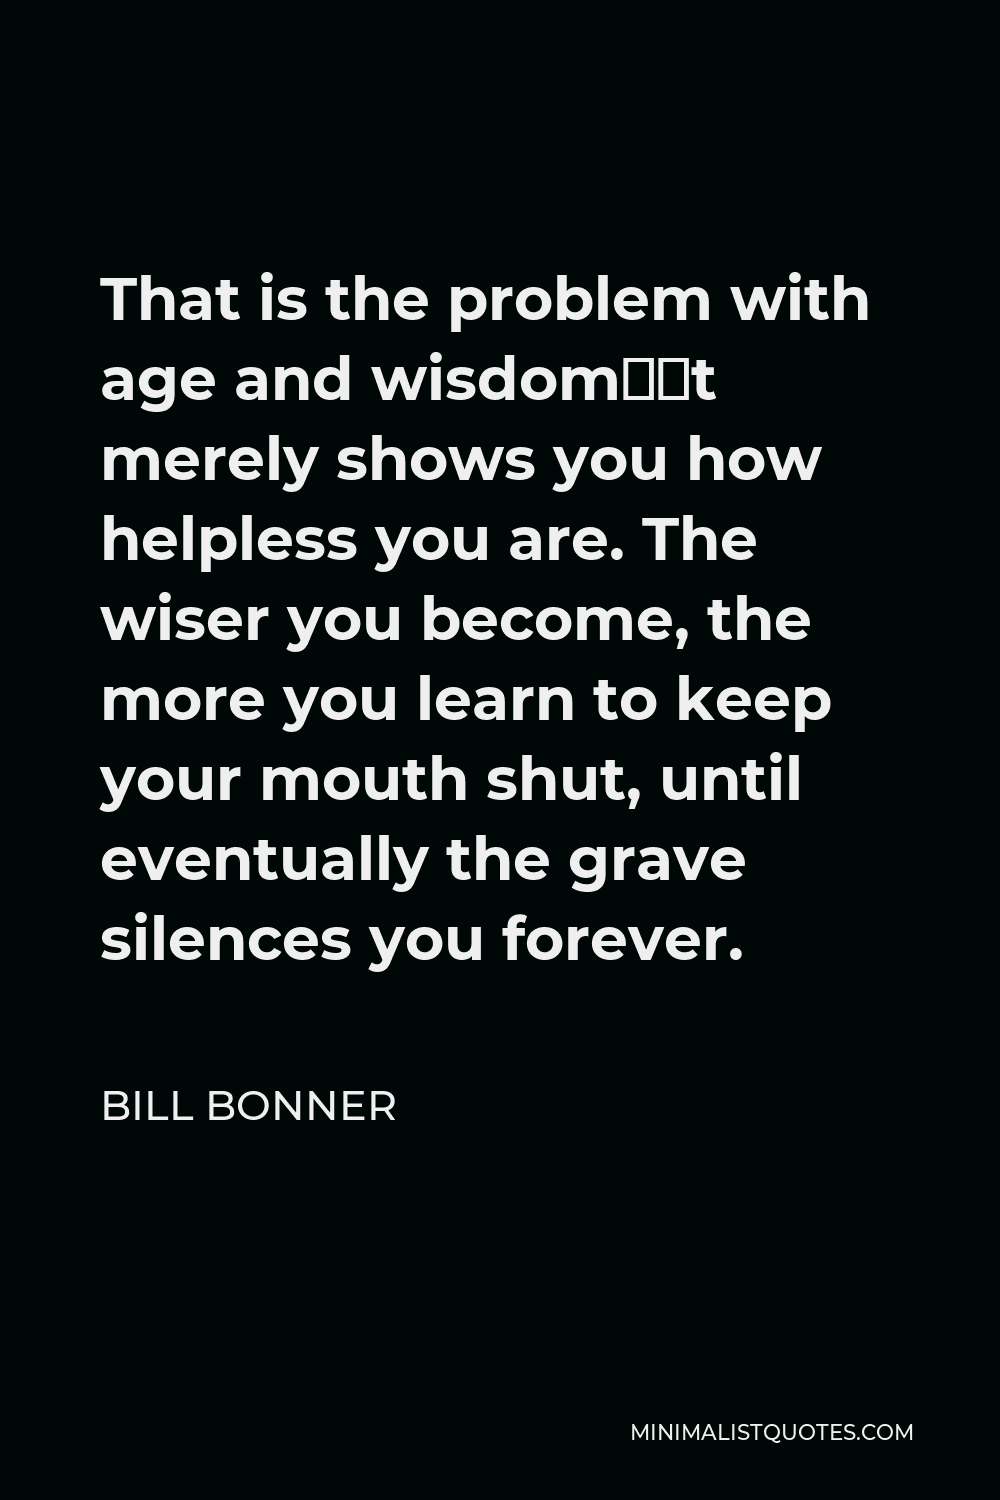 Bill Bonner Quote - That is the problem with age and wisdom—it merely shows you how helpless you are. The wiser you become, the more you learn to keep your mouth shut, until eventually the grave silences you forever.